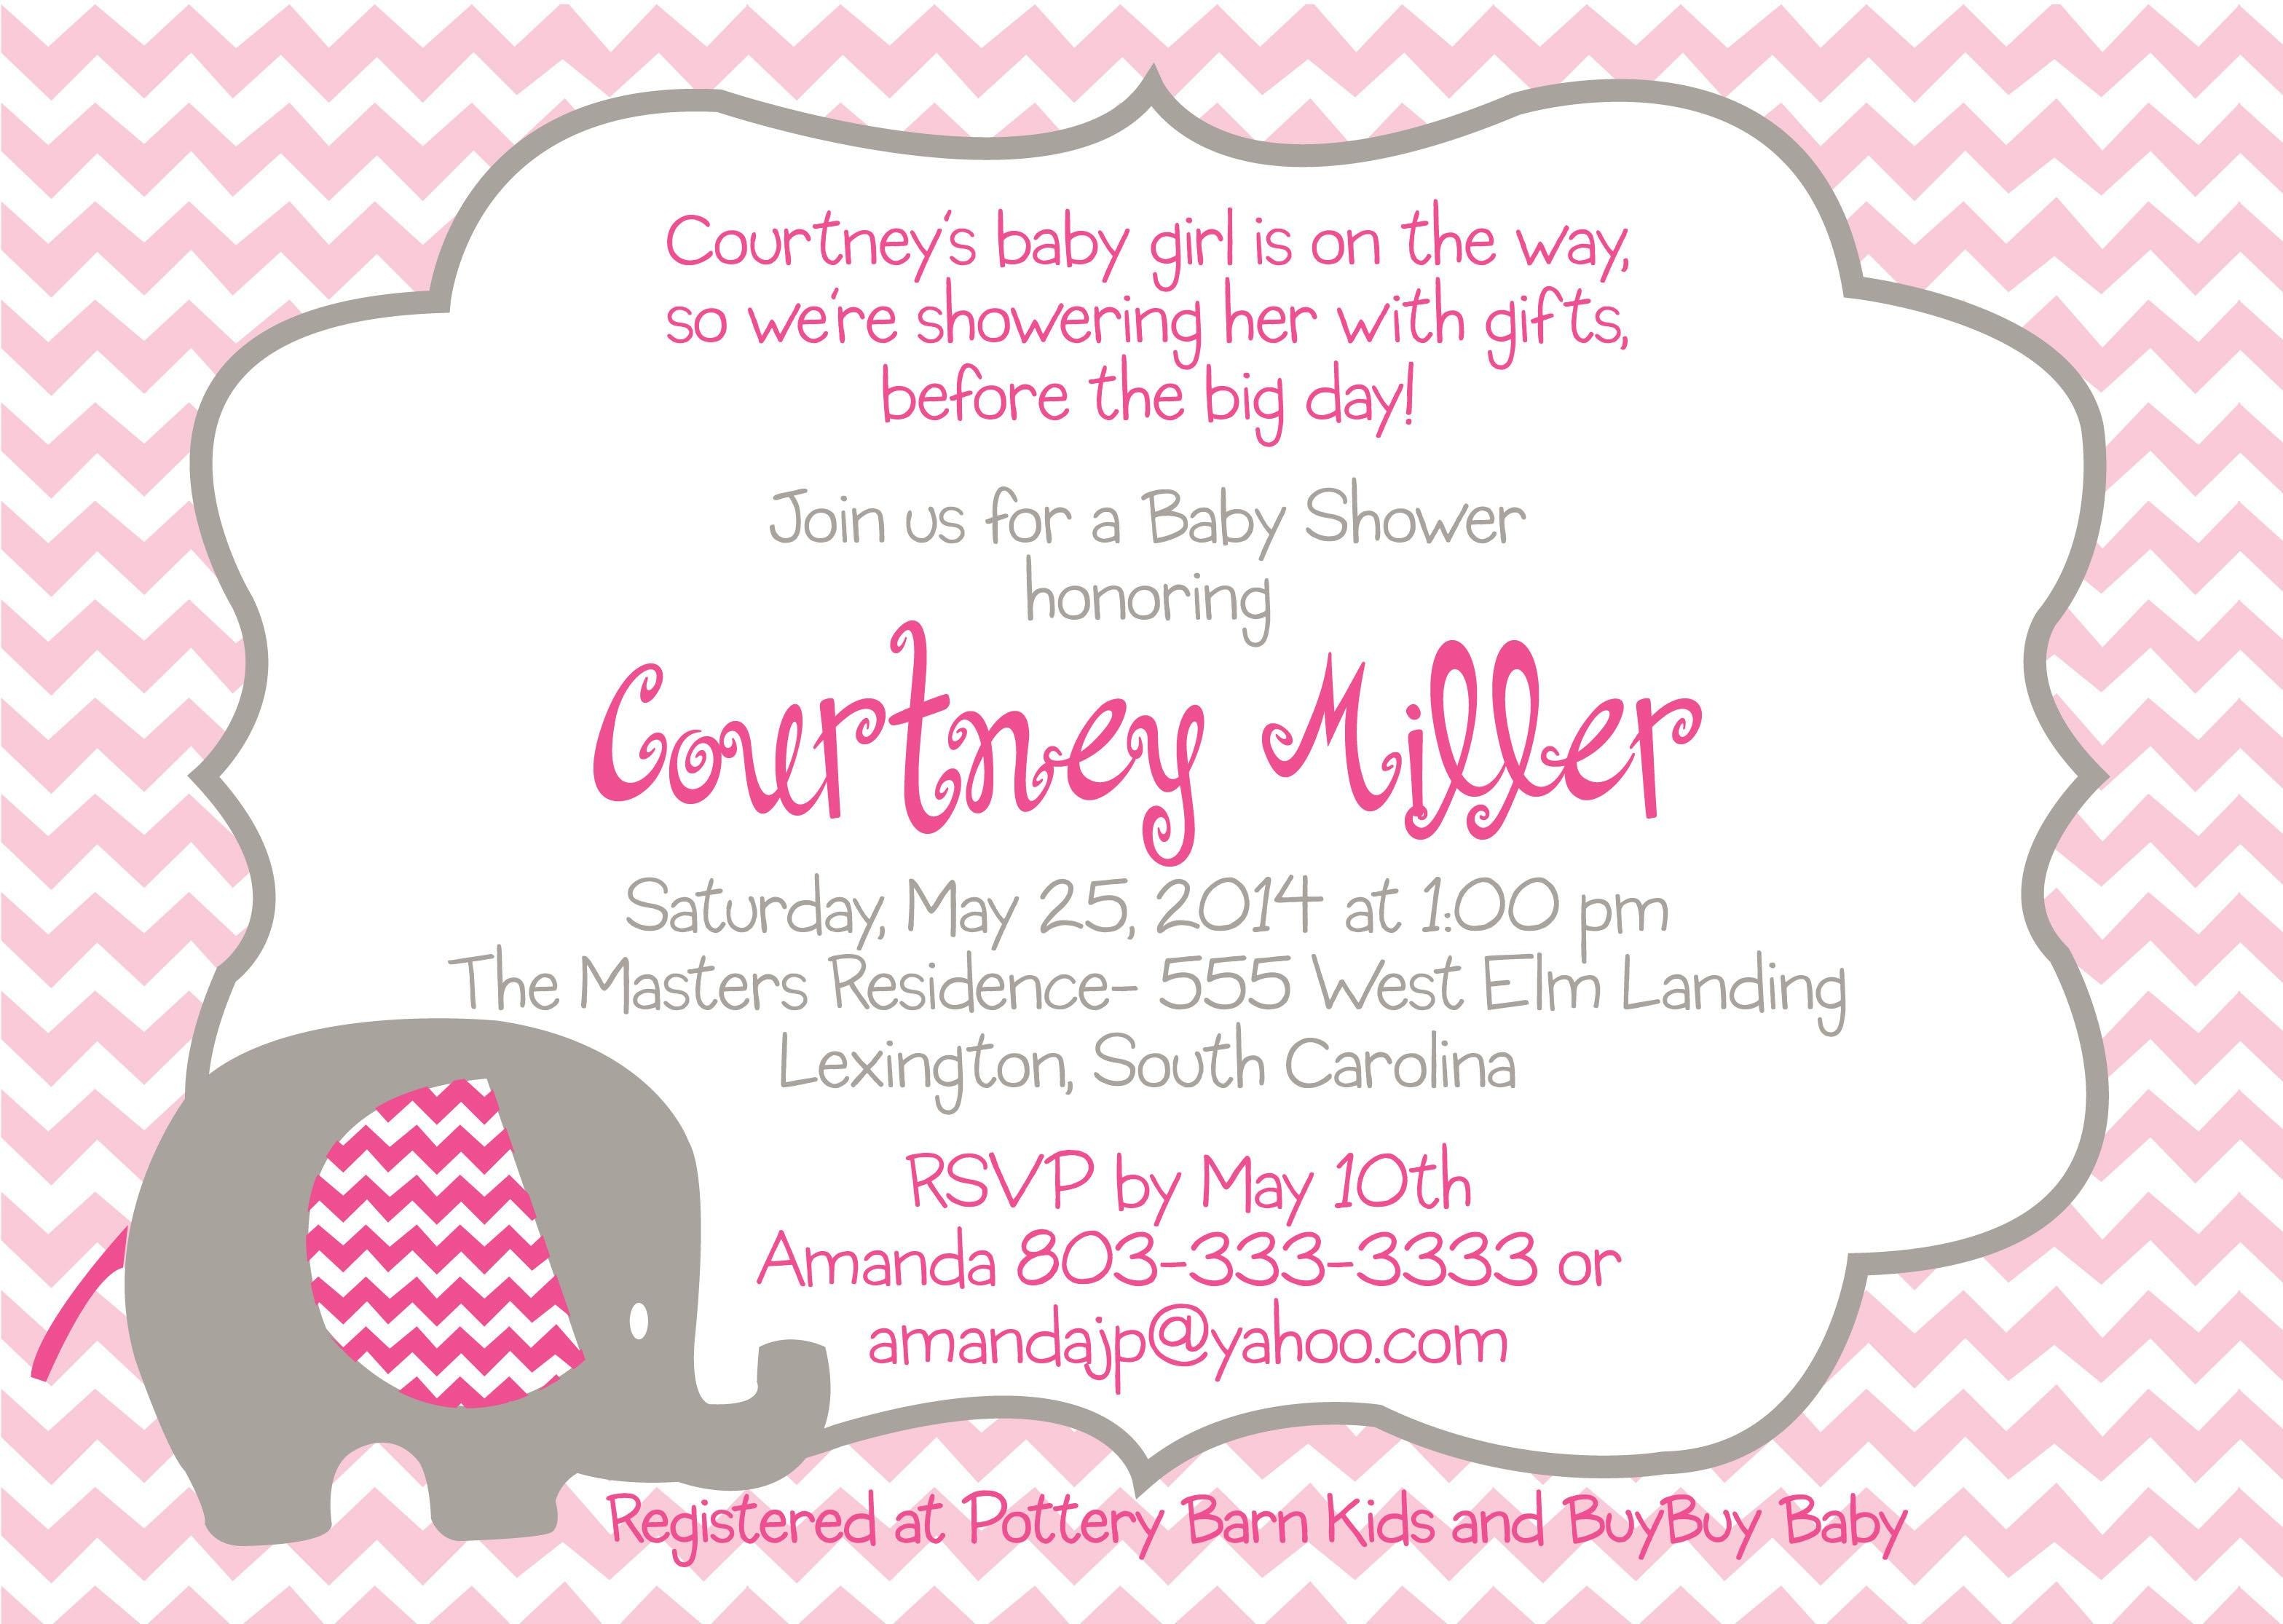 Full Size of Baby Shower:inspirational Elephant Baby Shower Invitations Photo Concepts Elephant Baby Shower Invitations As Well As Creative Baby Shower Gifts With Baby Shower Flower Wall Plus Baby Shower Gift Bags Together With Baby Shower Messages